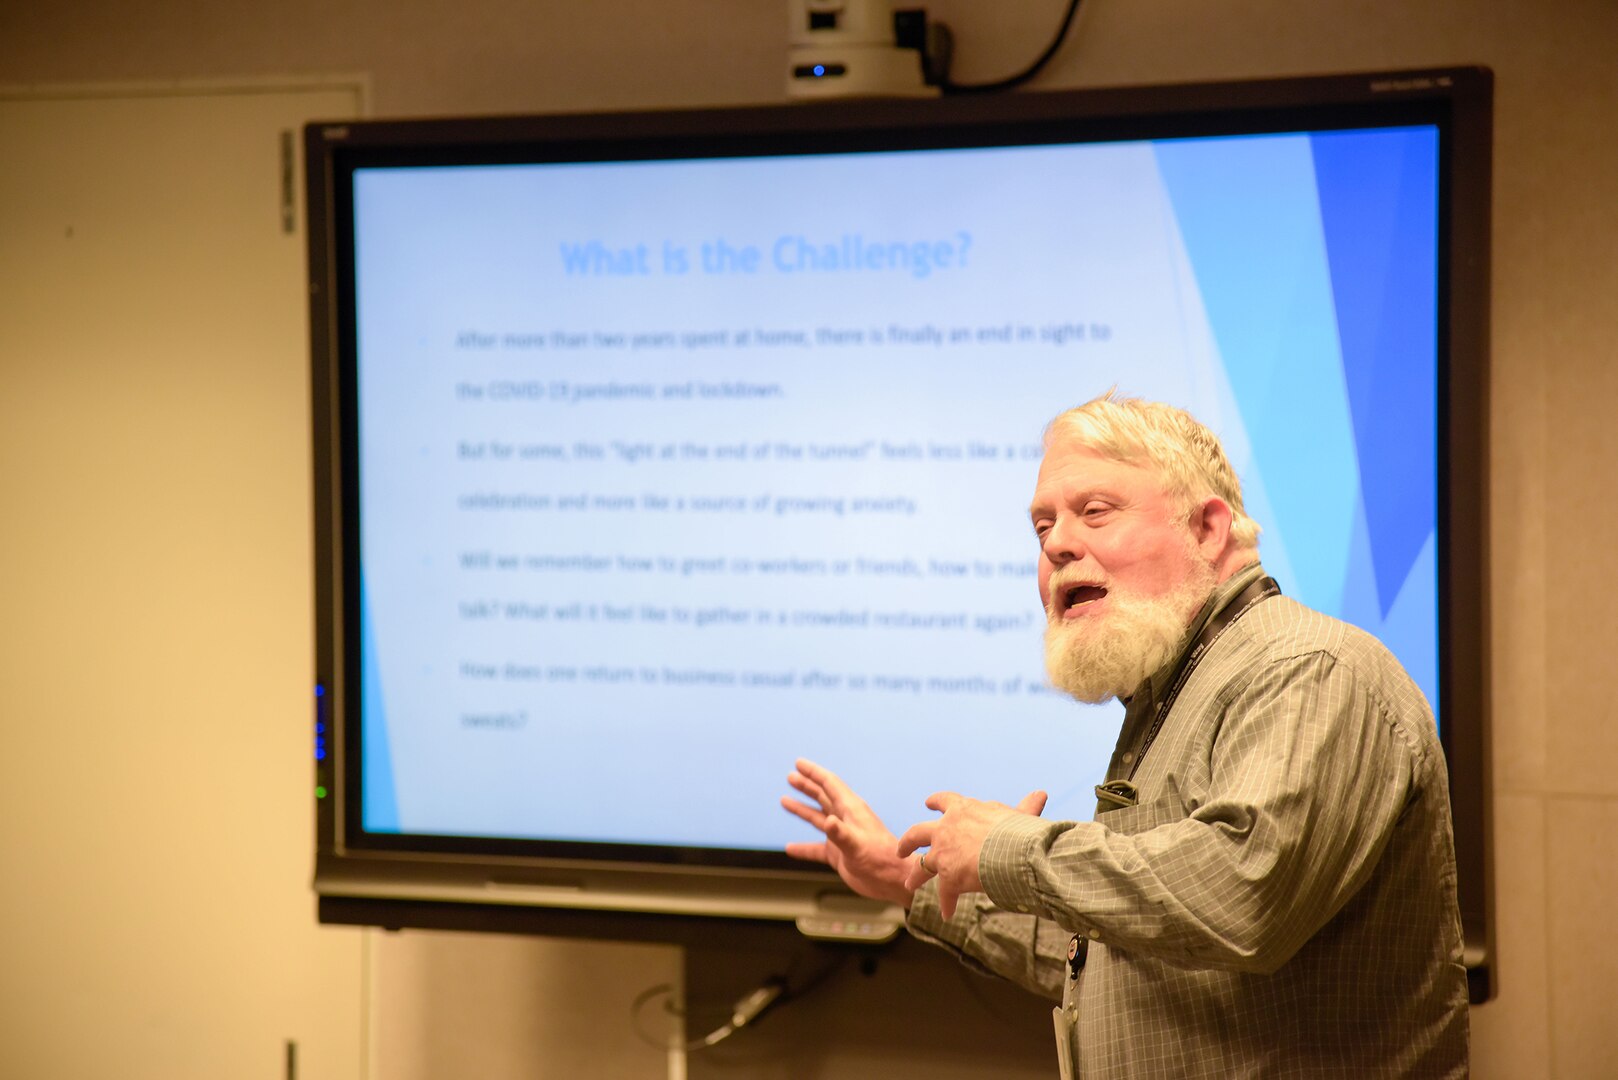 A man with white hair and a beard in front of a Powerpoint presentation.